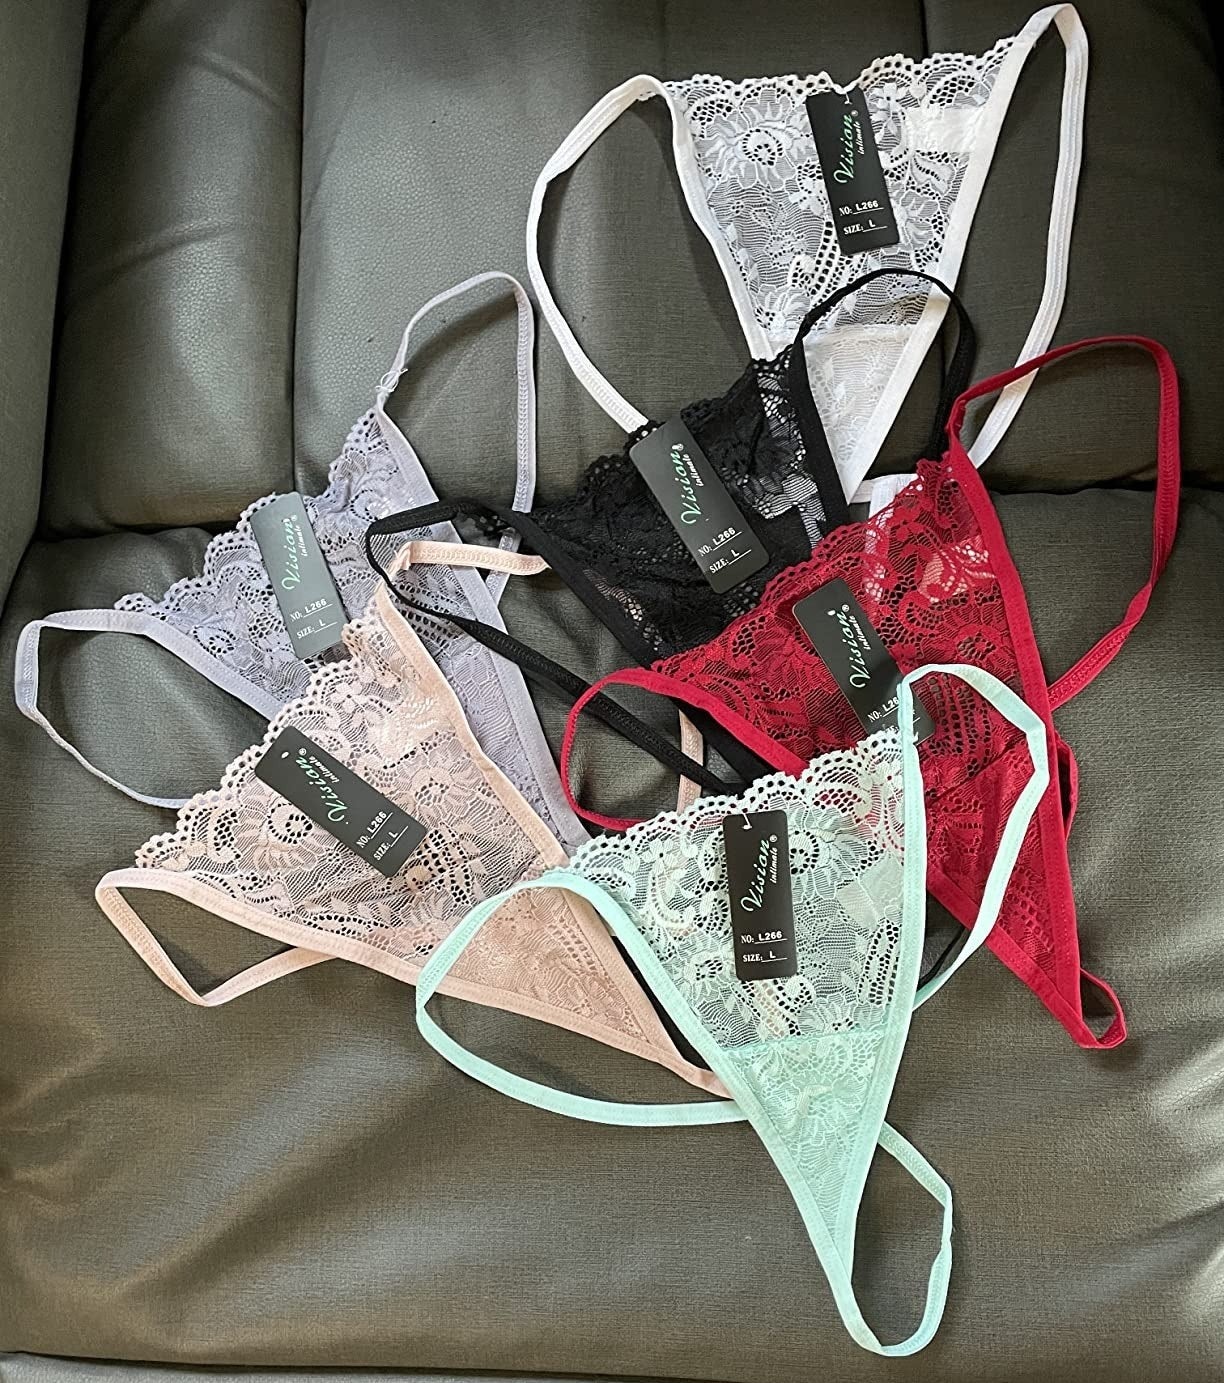 21 Best Pairs Of Lace Underwear You'll Love Wearing